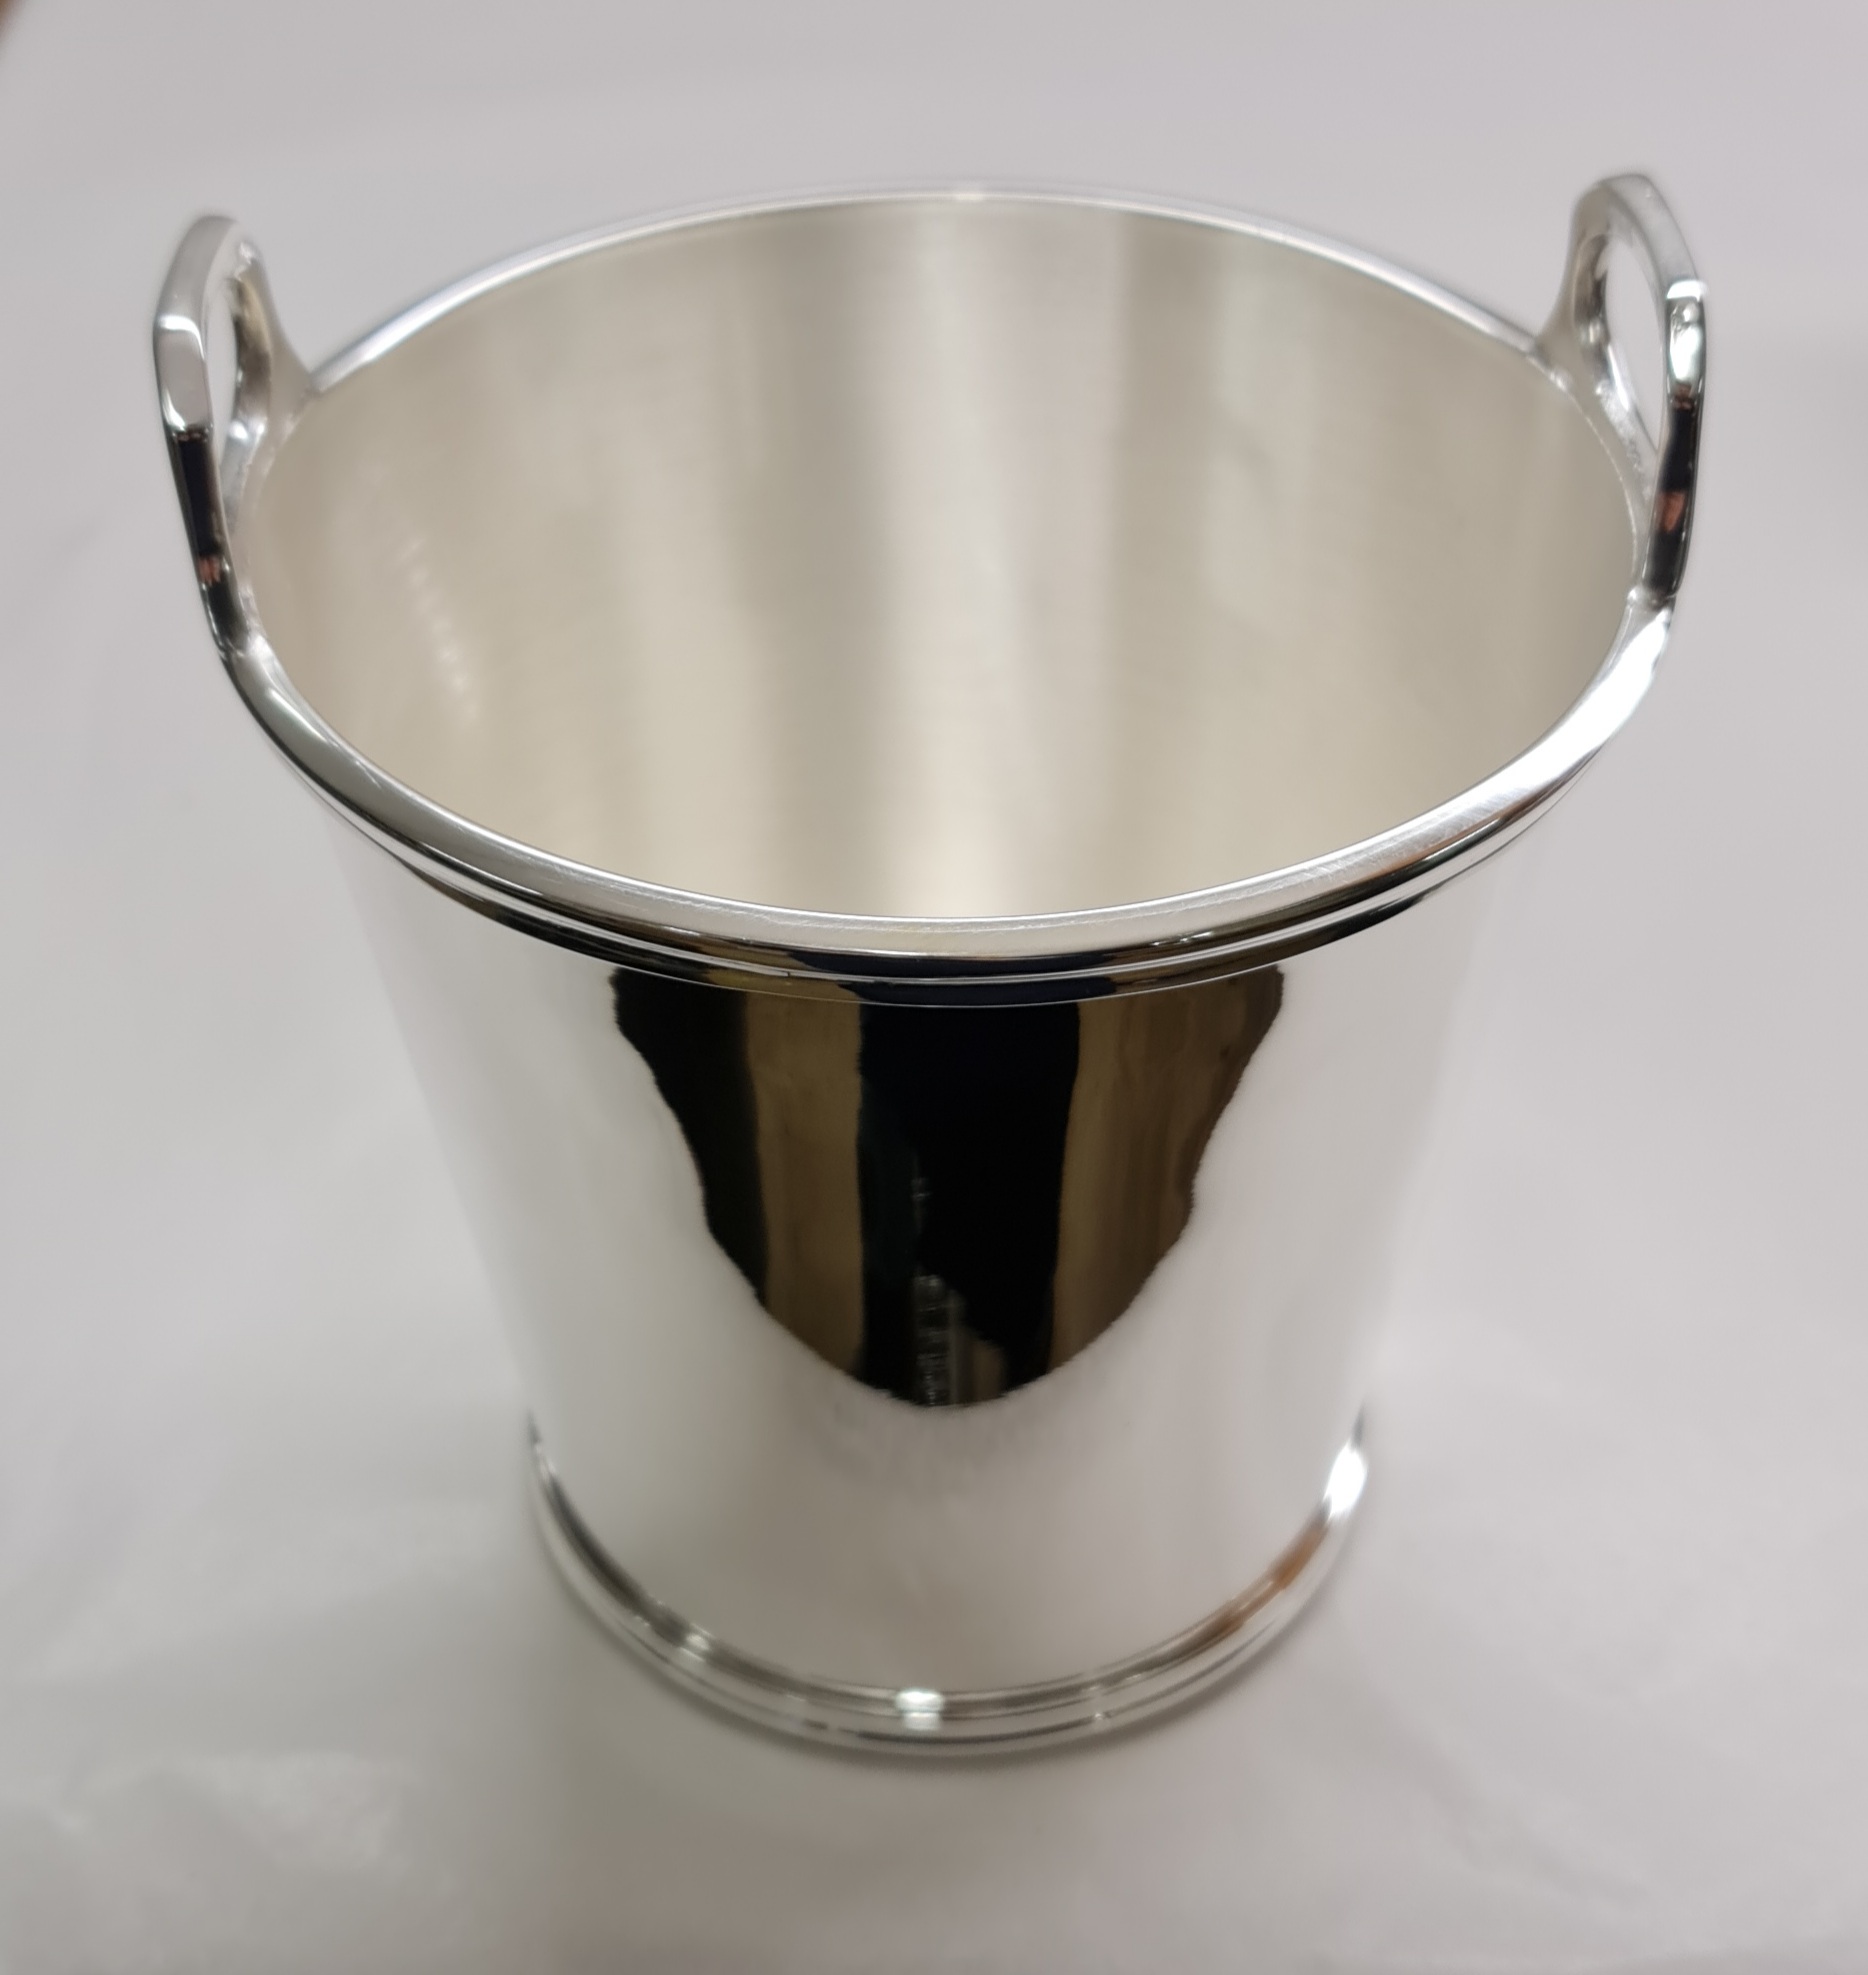 Mini Ice Bucket 'D' Handles - Silver Plated Mini Bucket for individual ...